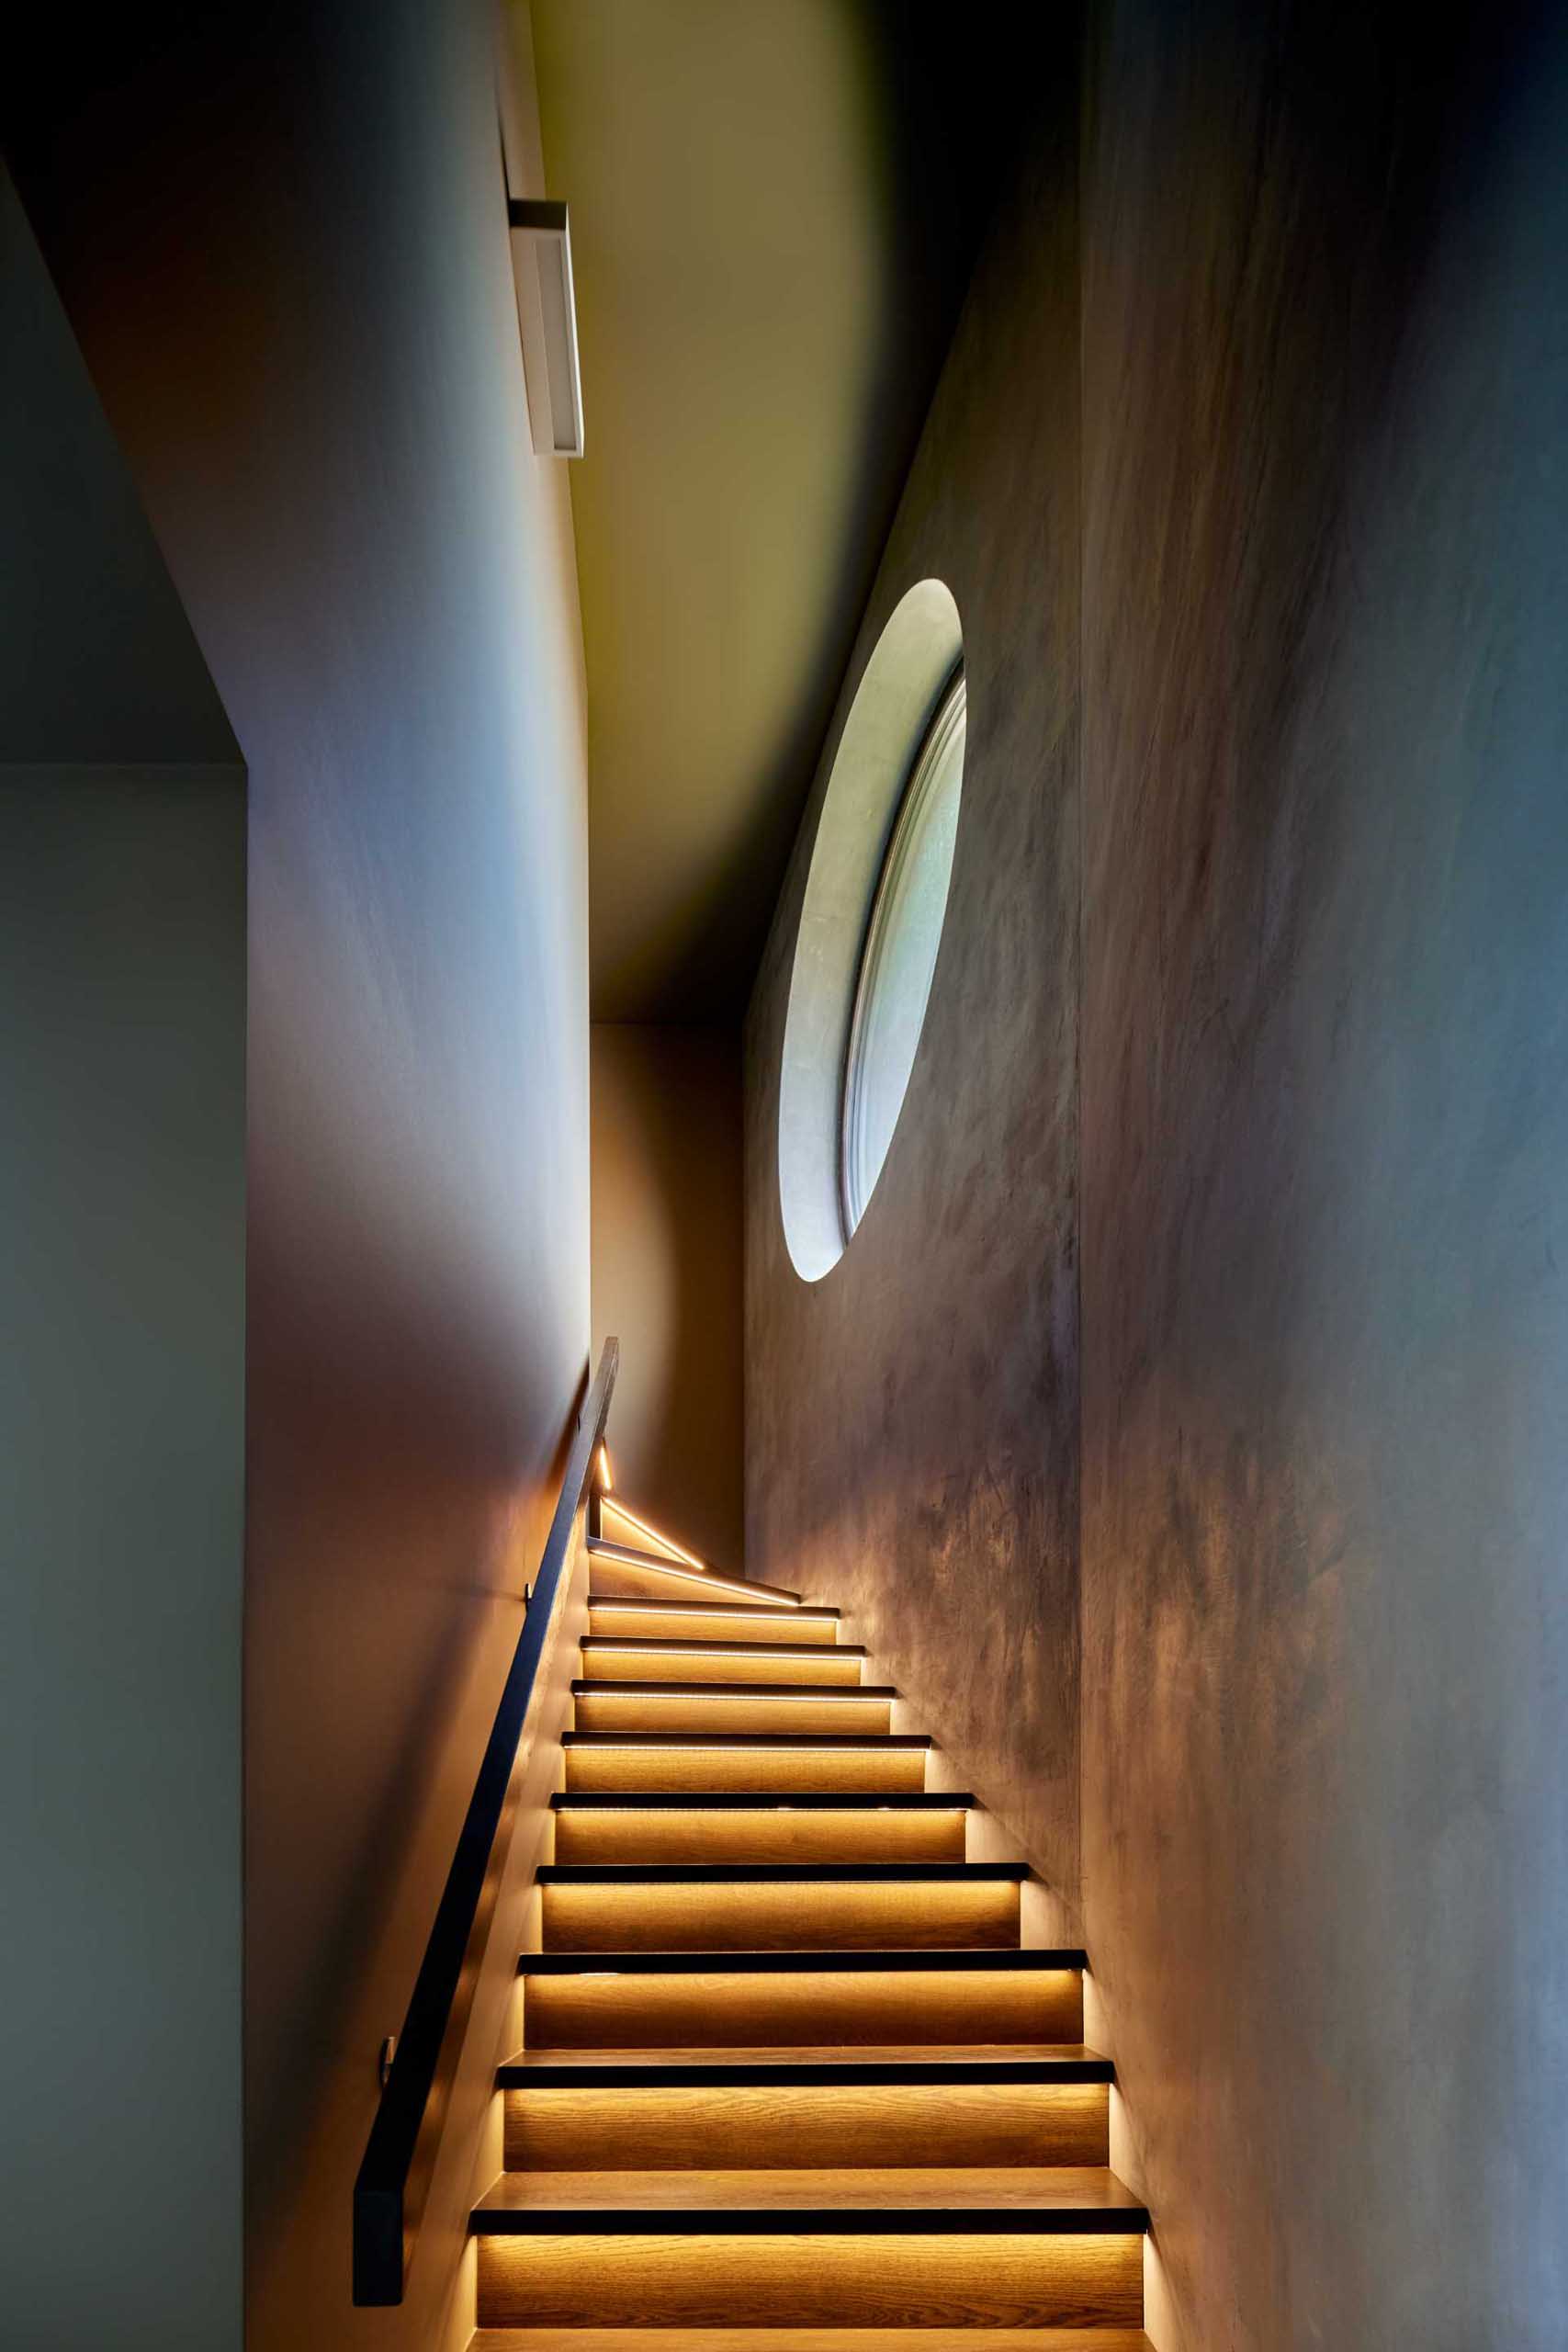 This modern and dark staircase includes hidden LED lighting underneath each stair tread, while the round window adds natural light during the day.